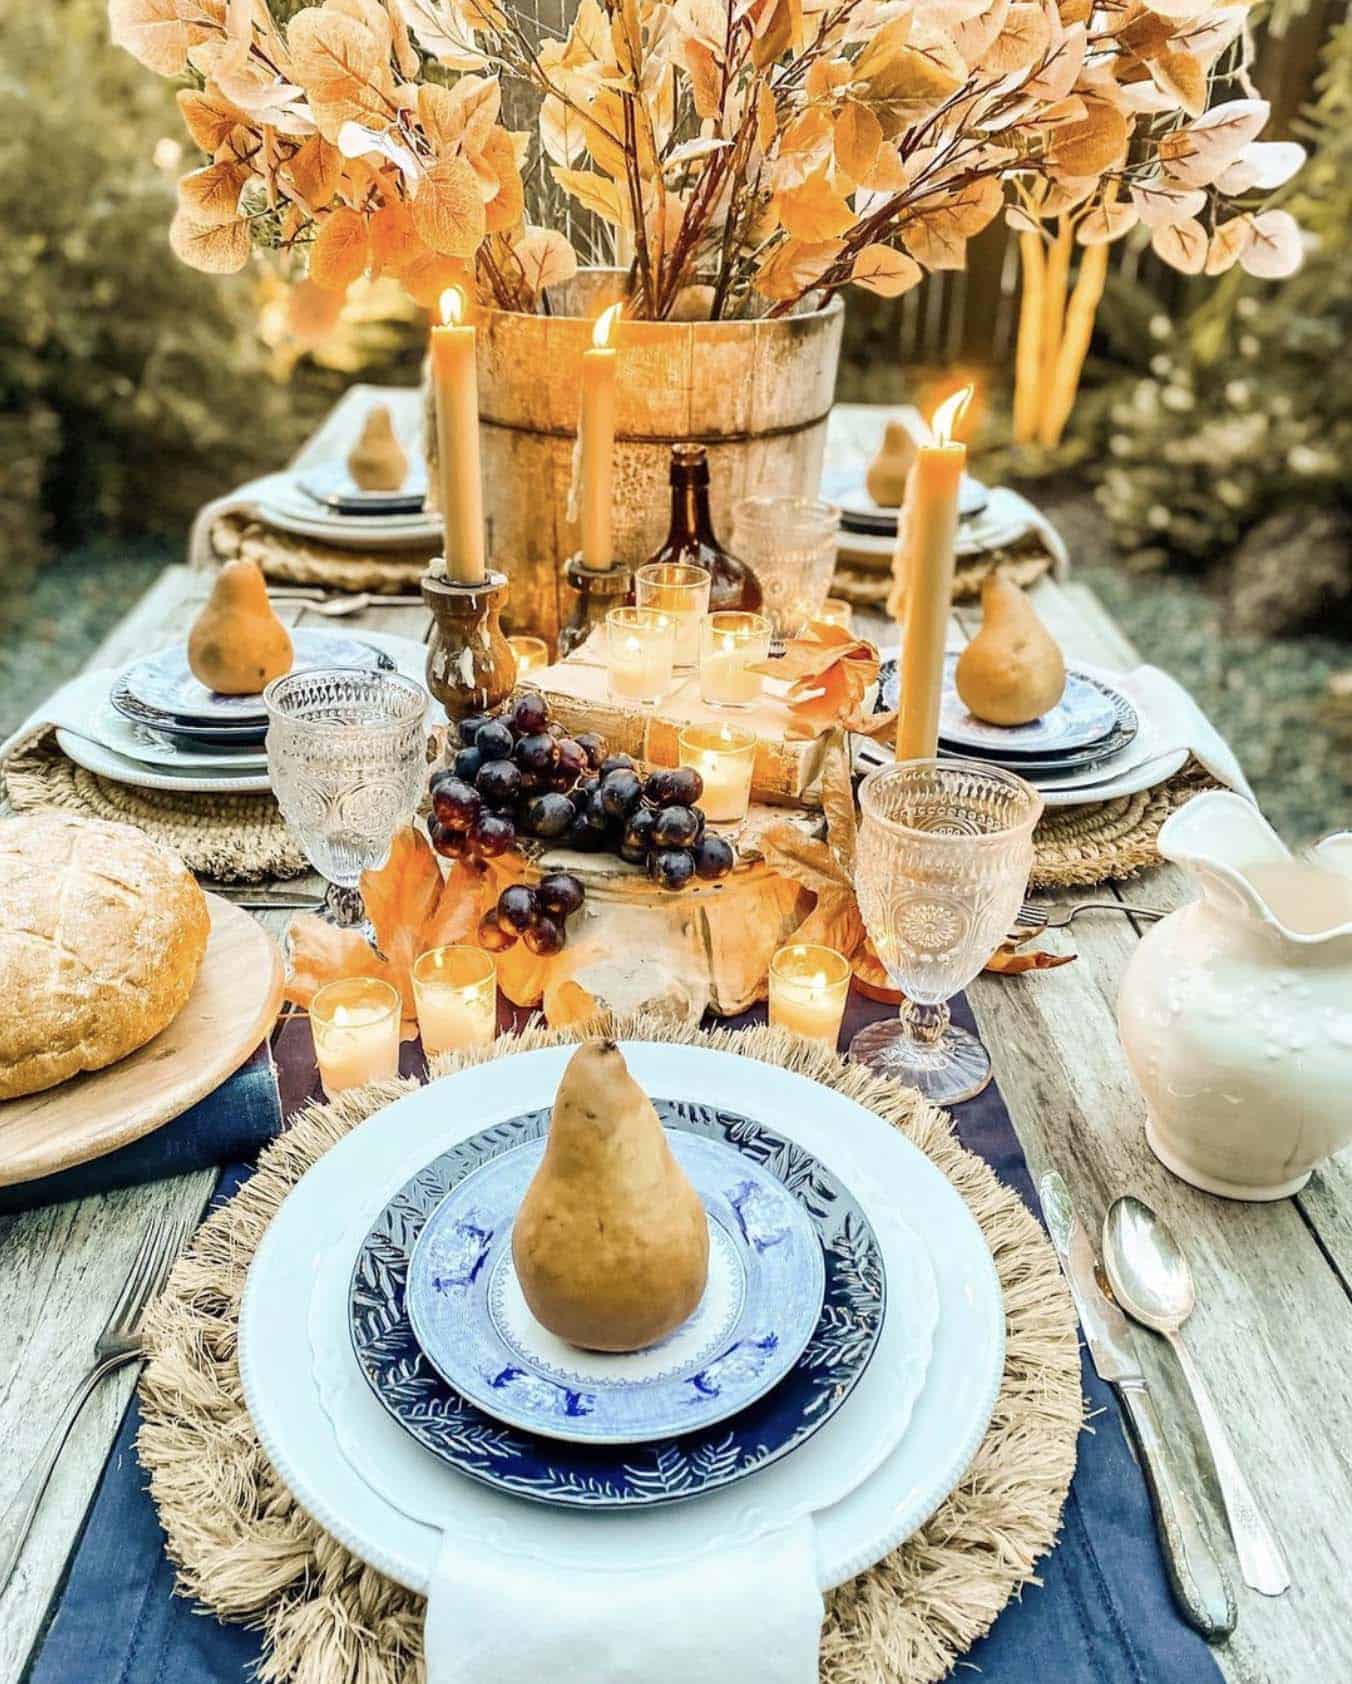 outdoor picnic table decorated for fall entertaining